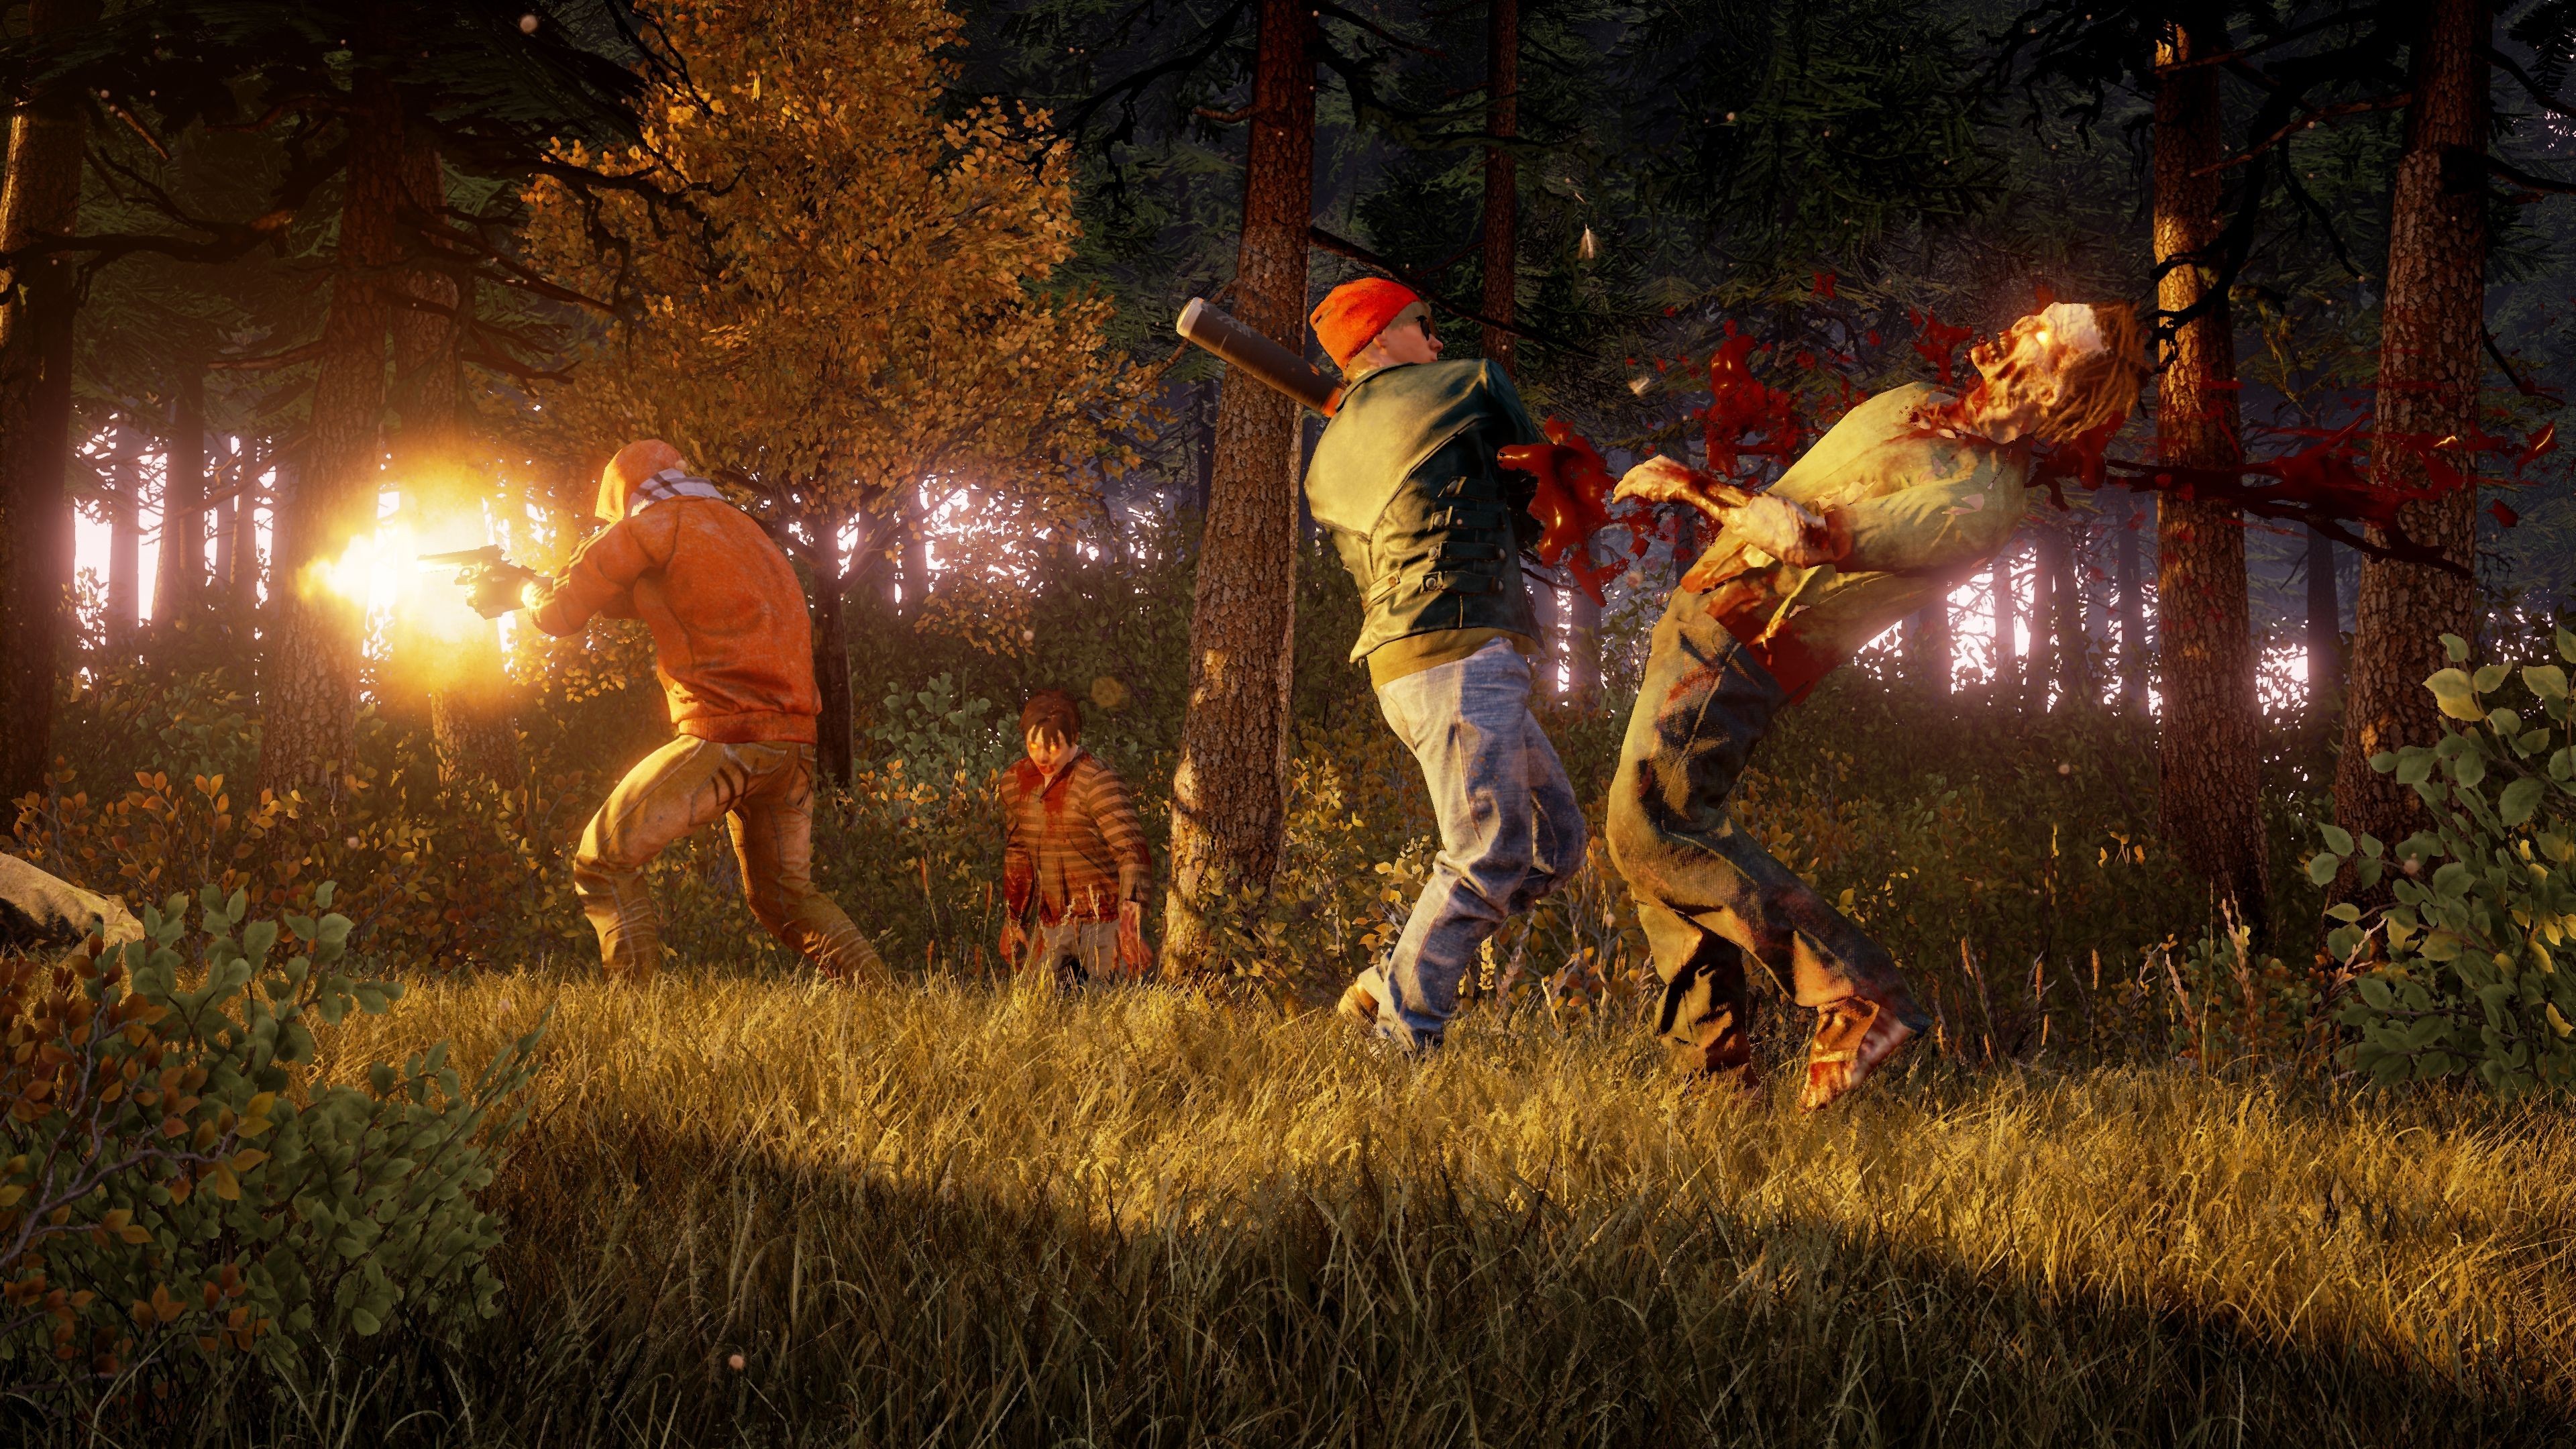 Buy State Of Decay 2 Ultimate Edition Pc Xbox One Microsoft Store